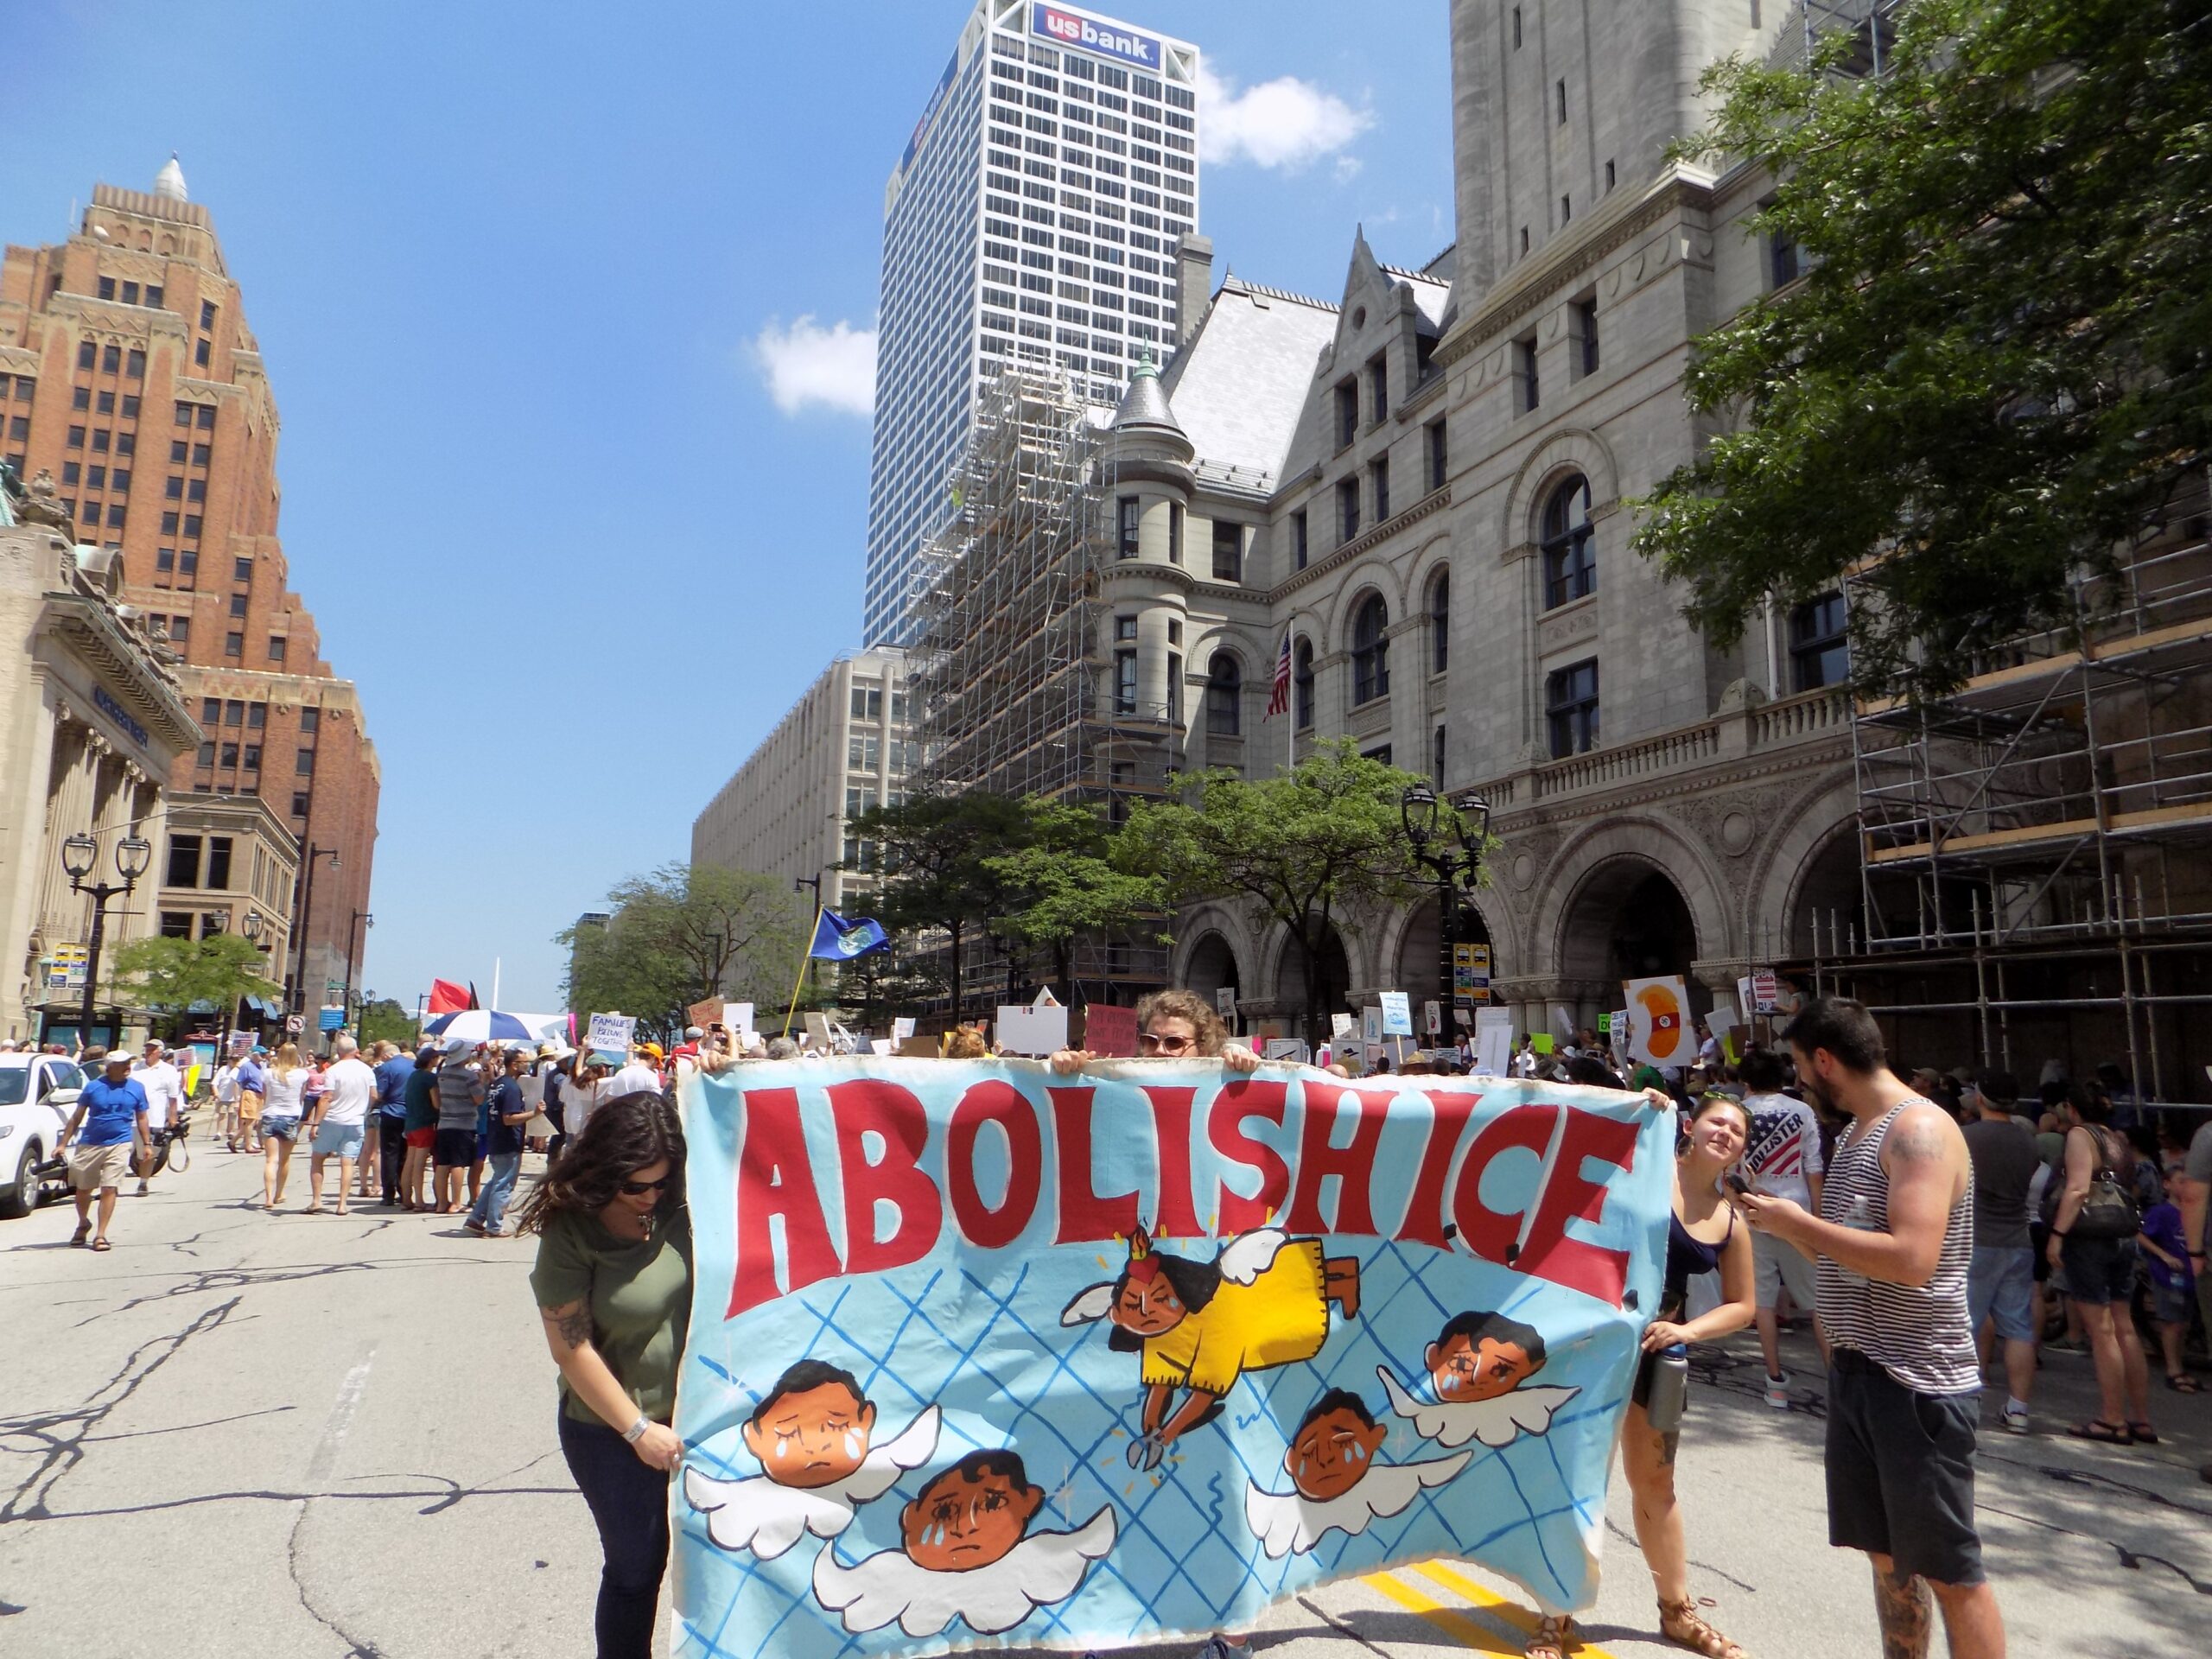 Keep Families Together rally in Milwaukee, June 2018